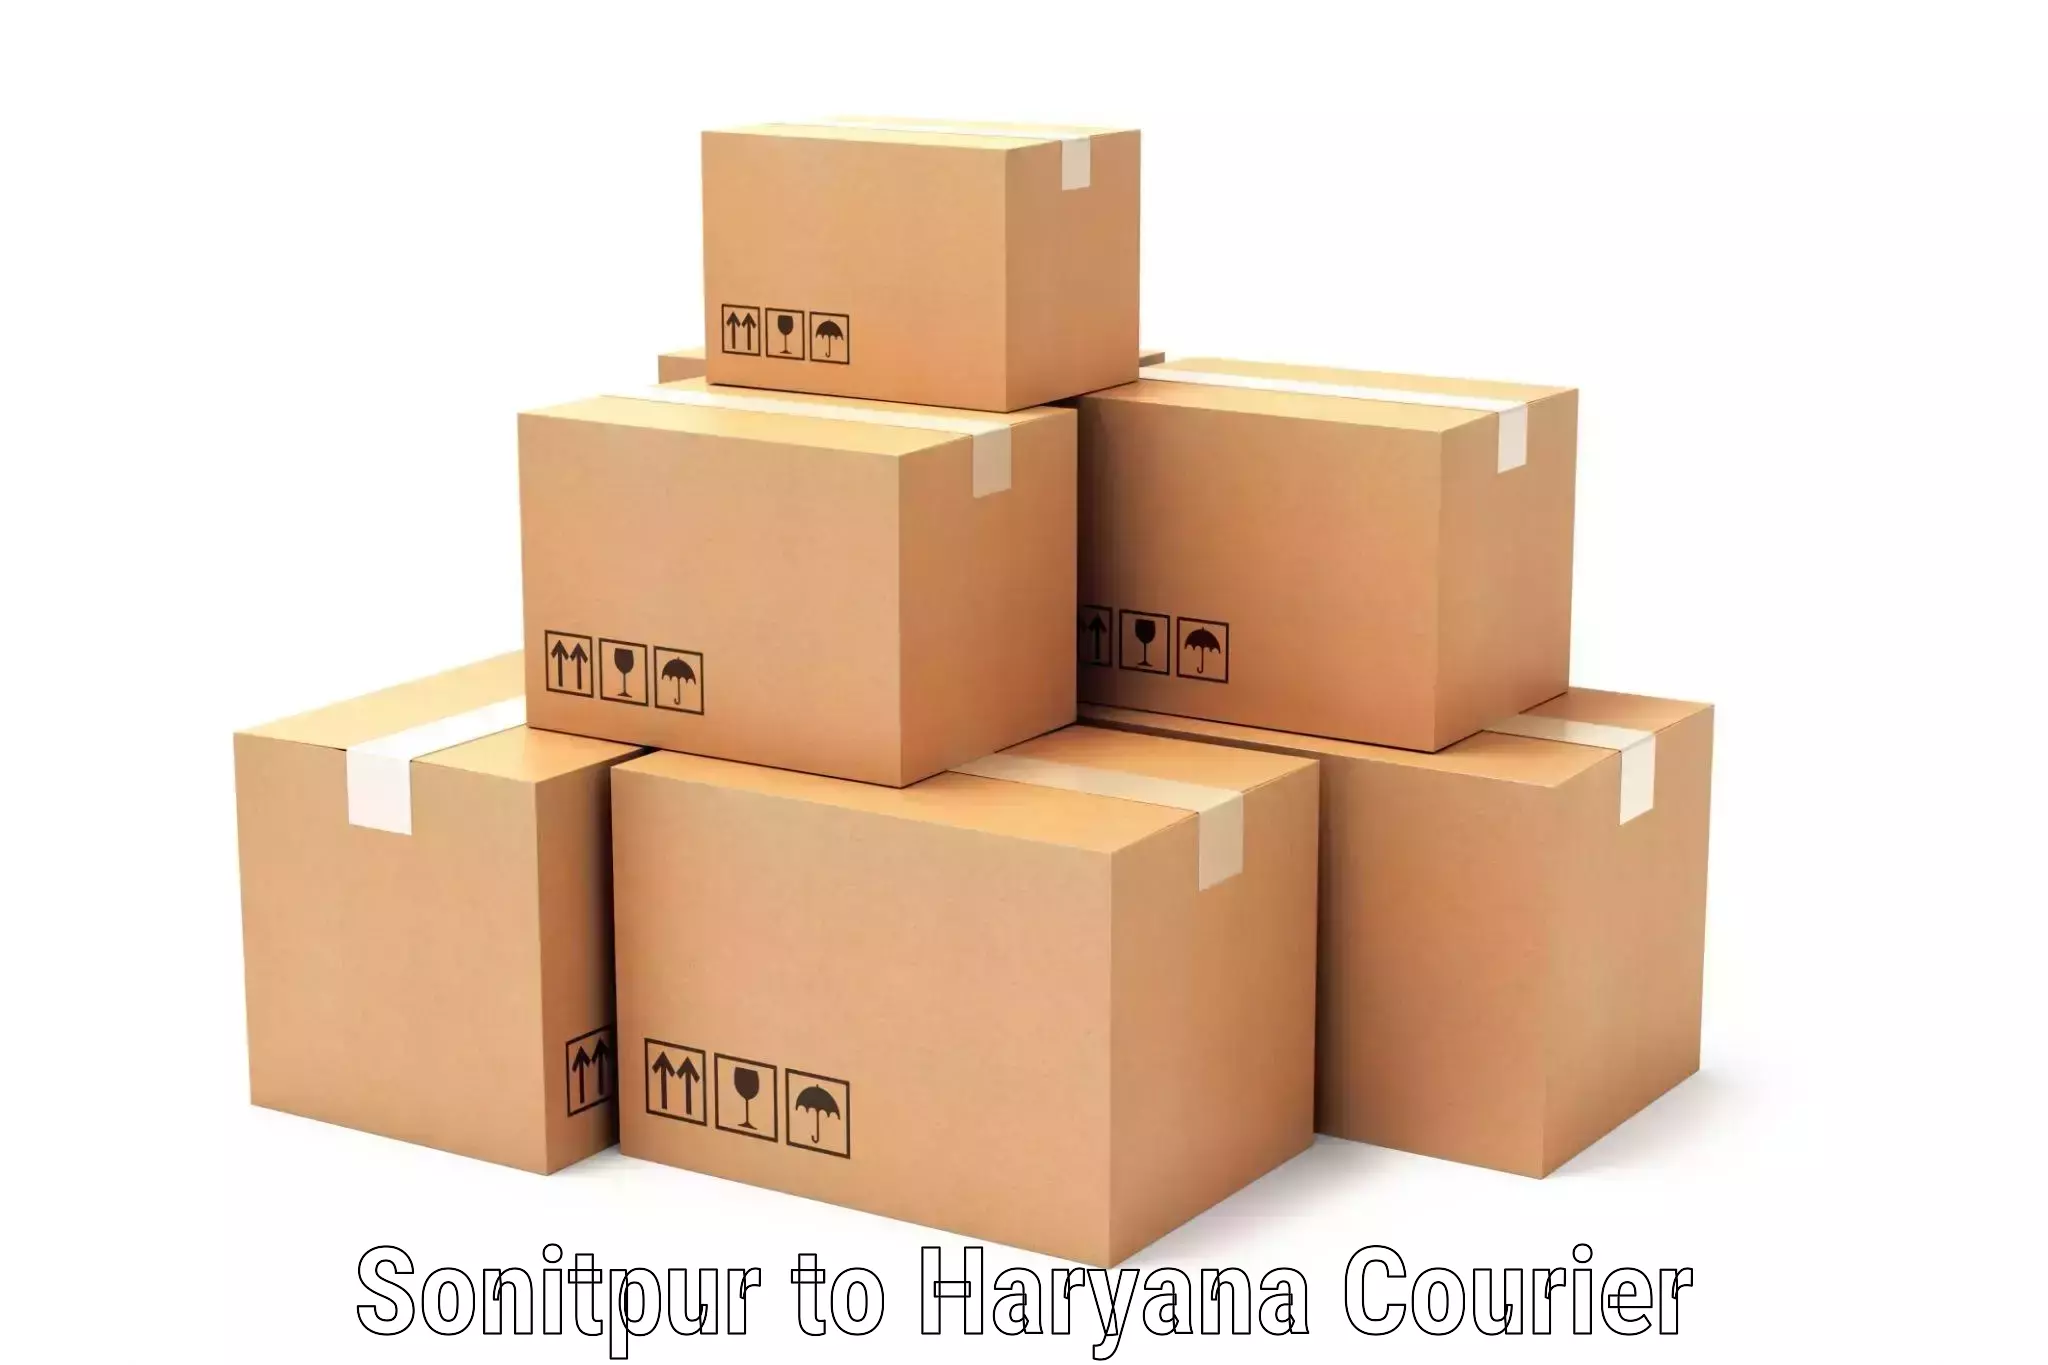 Same-day delivery solutions Sonitpur to Hisar